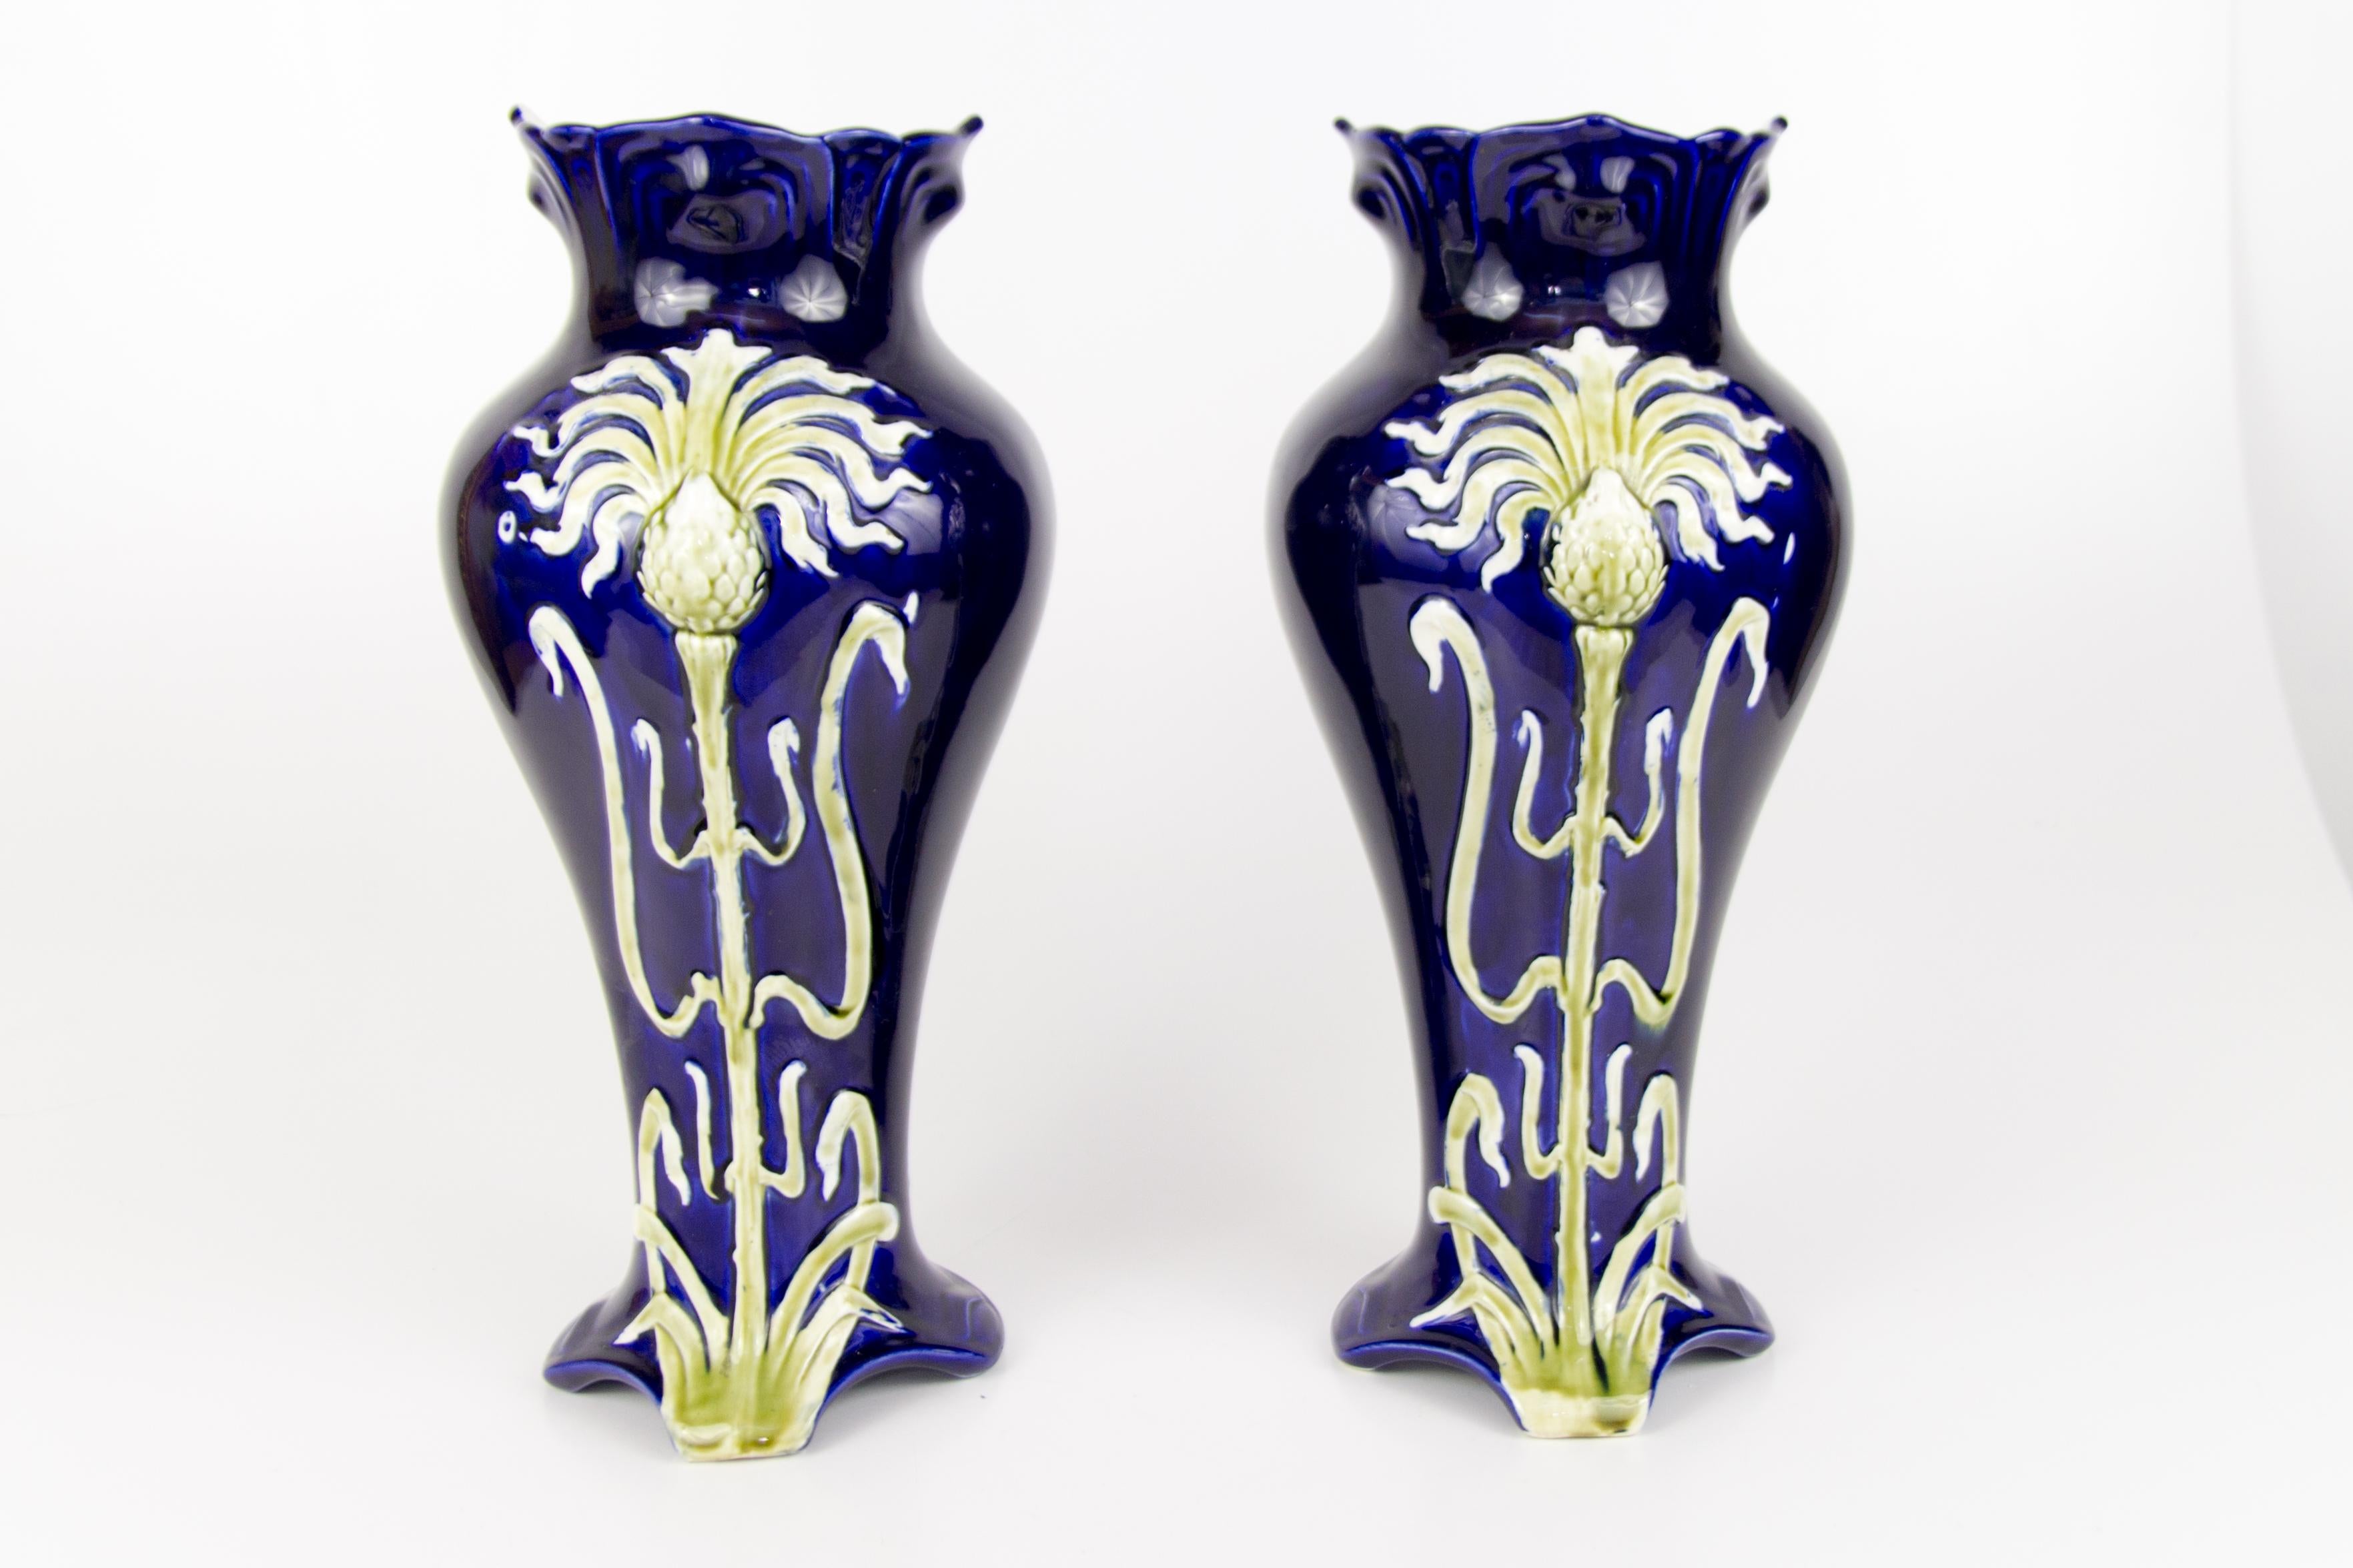 Hand-Painted Pair of Early 20th Century French Art Nouveau Vases by J. Bernard De Bruyne